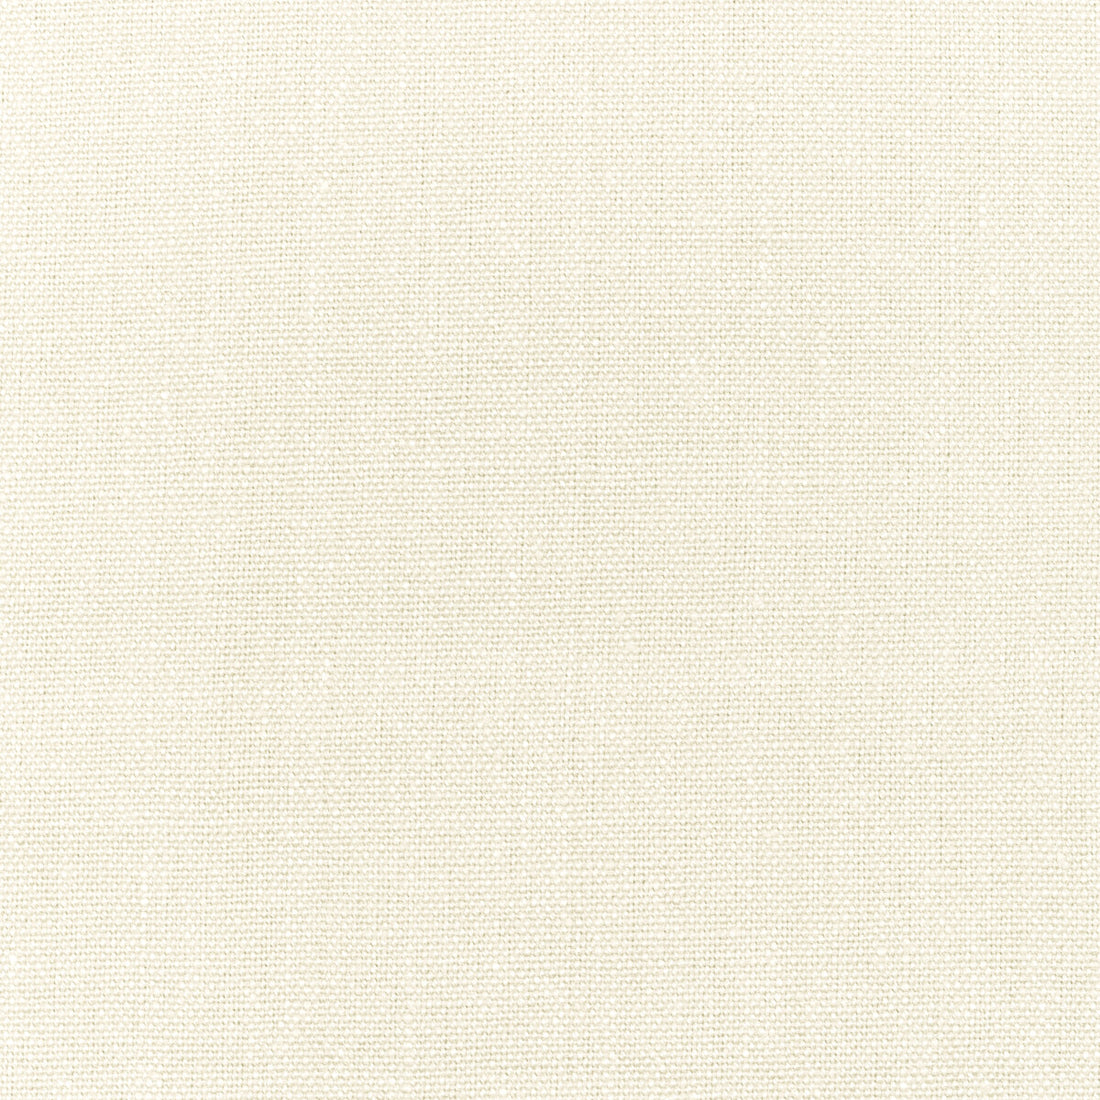 Poema fabric in pearl color - pattern 32233.101.0 - by Kravet Design in the Windsor Smith Home collection